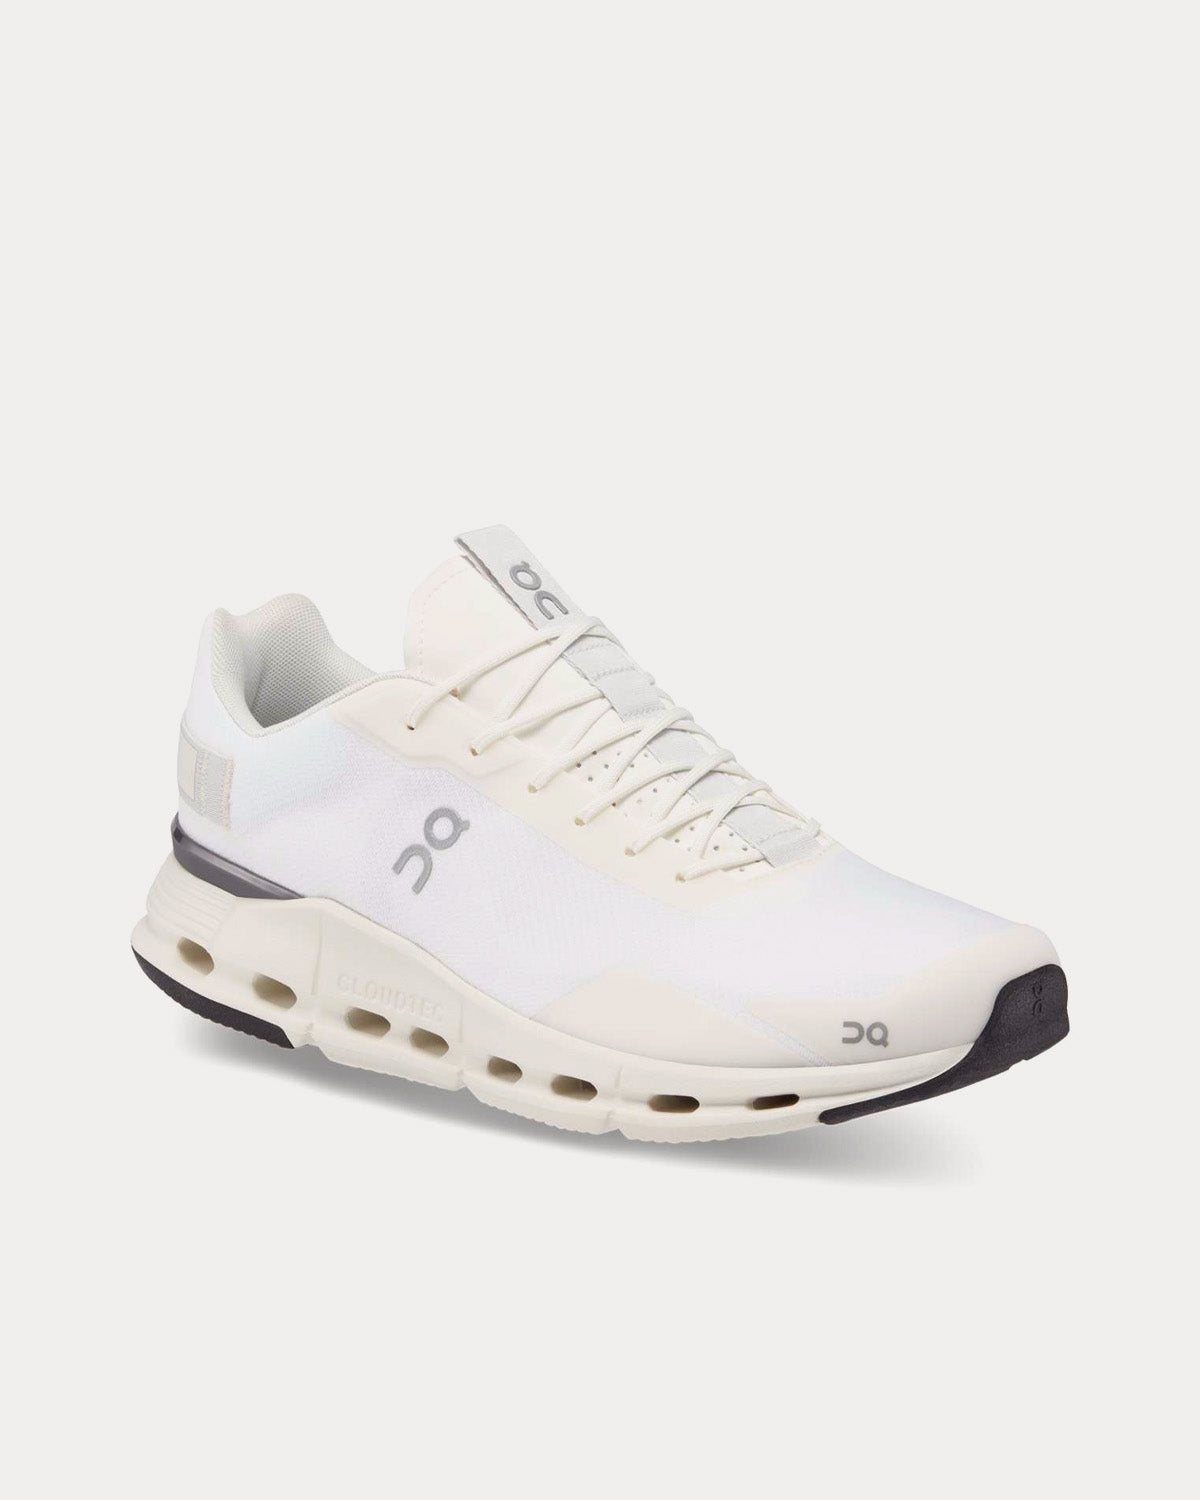 on-running-cloudnova-form-white-eclipse-running-shoes-sneak-in-peace